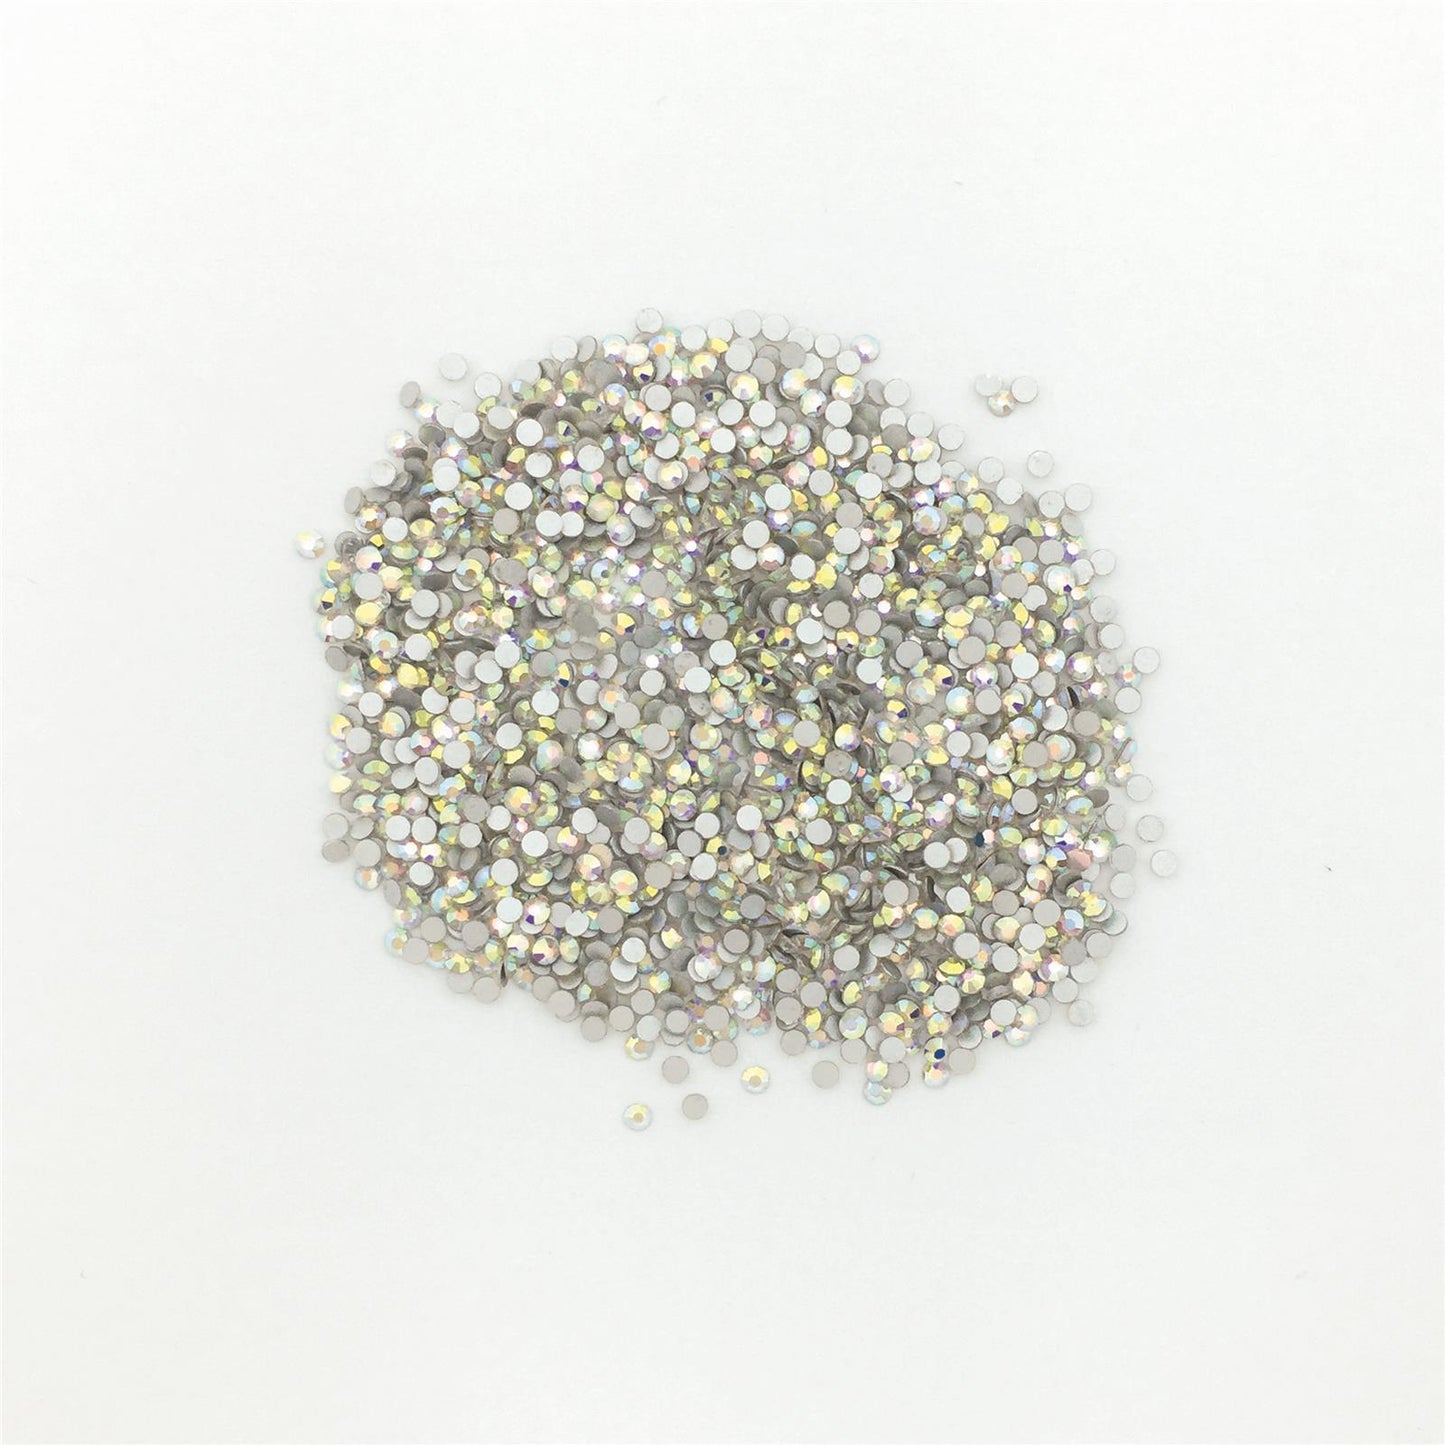 MSE rhinestones 1440 pieces clear-AB / SS6